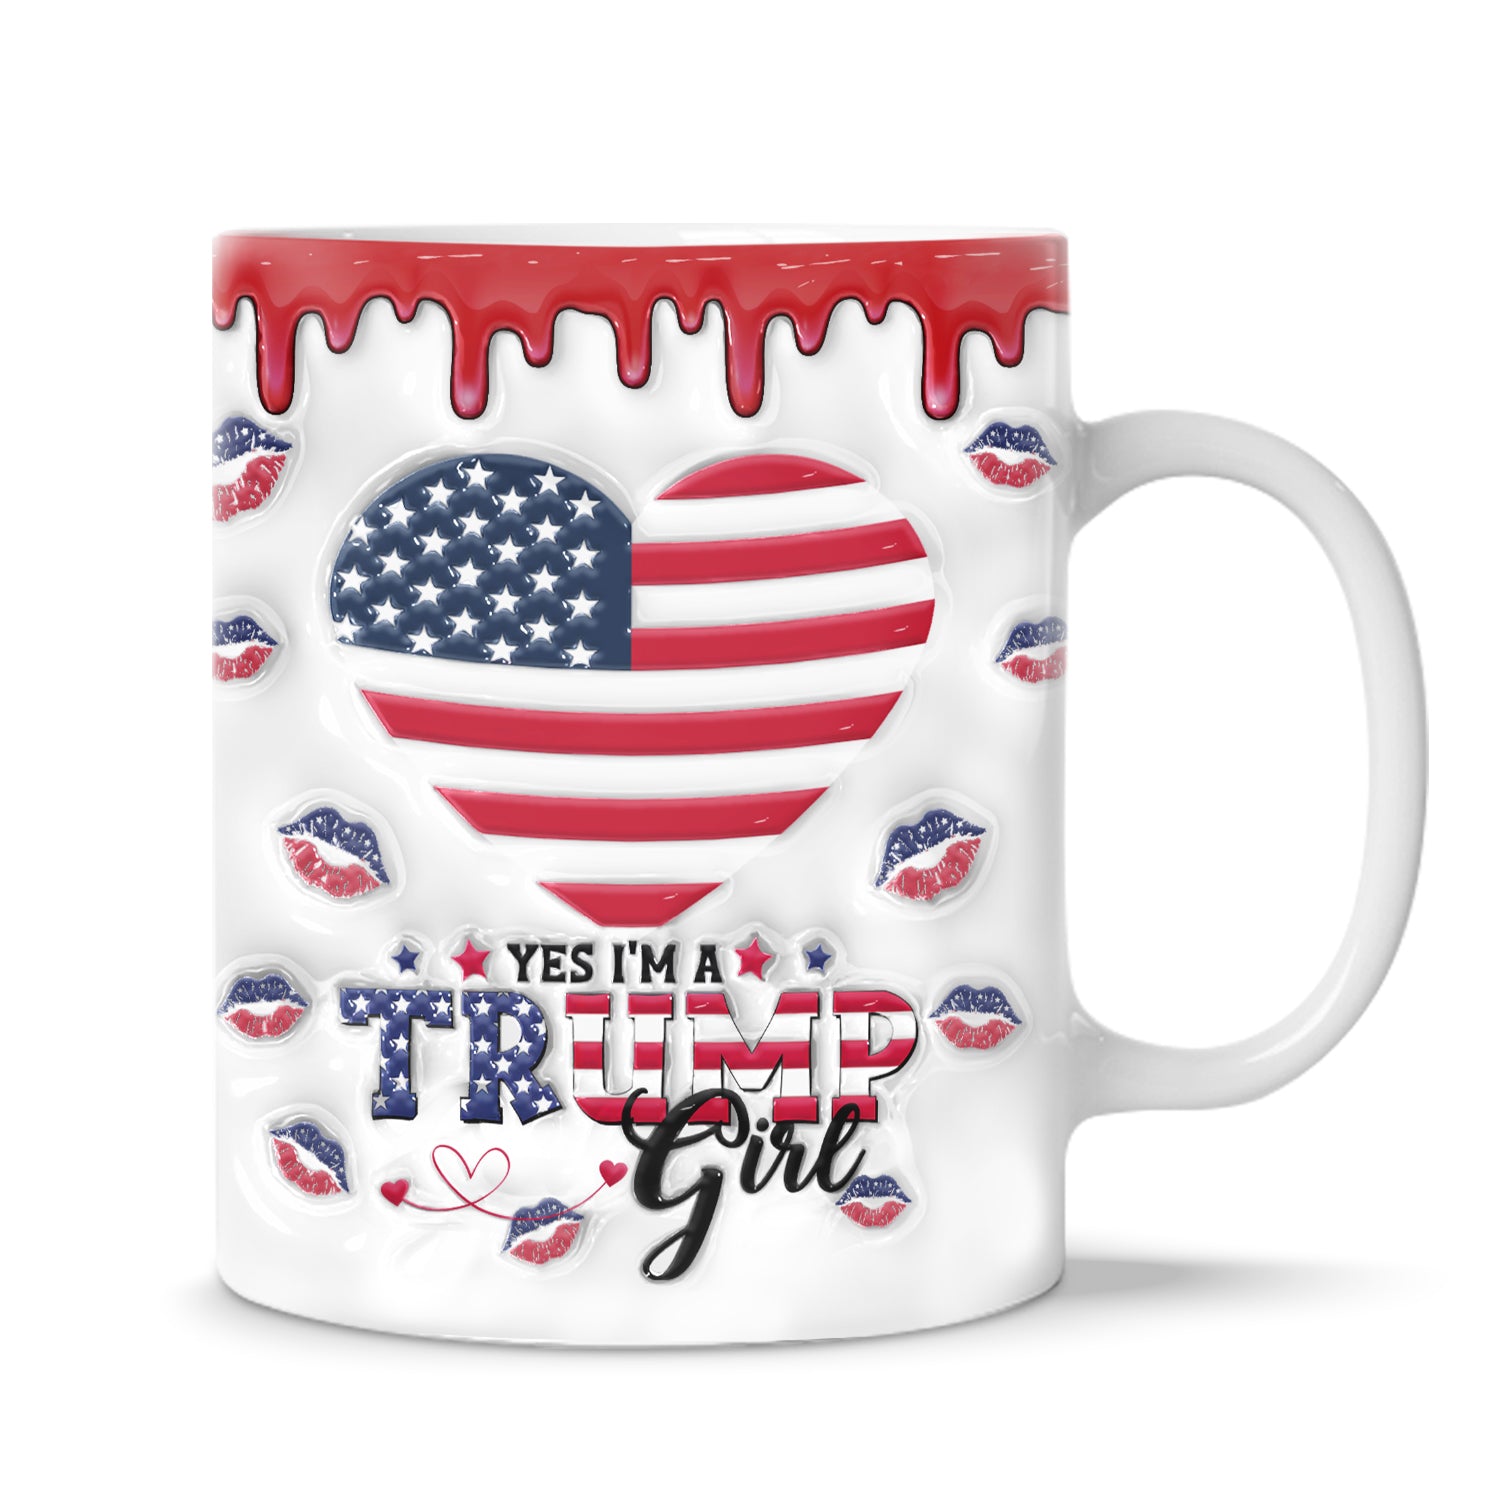 Yes, I'm A Trump Girl 3D Inflated Effect Printed Mug - M27UP